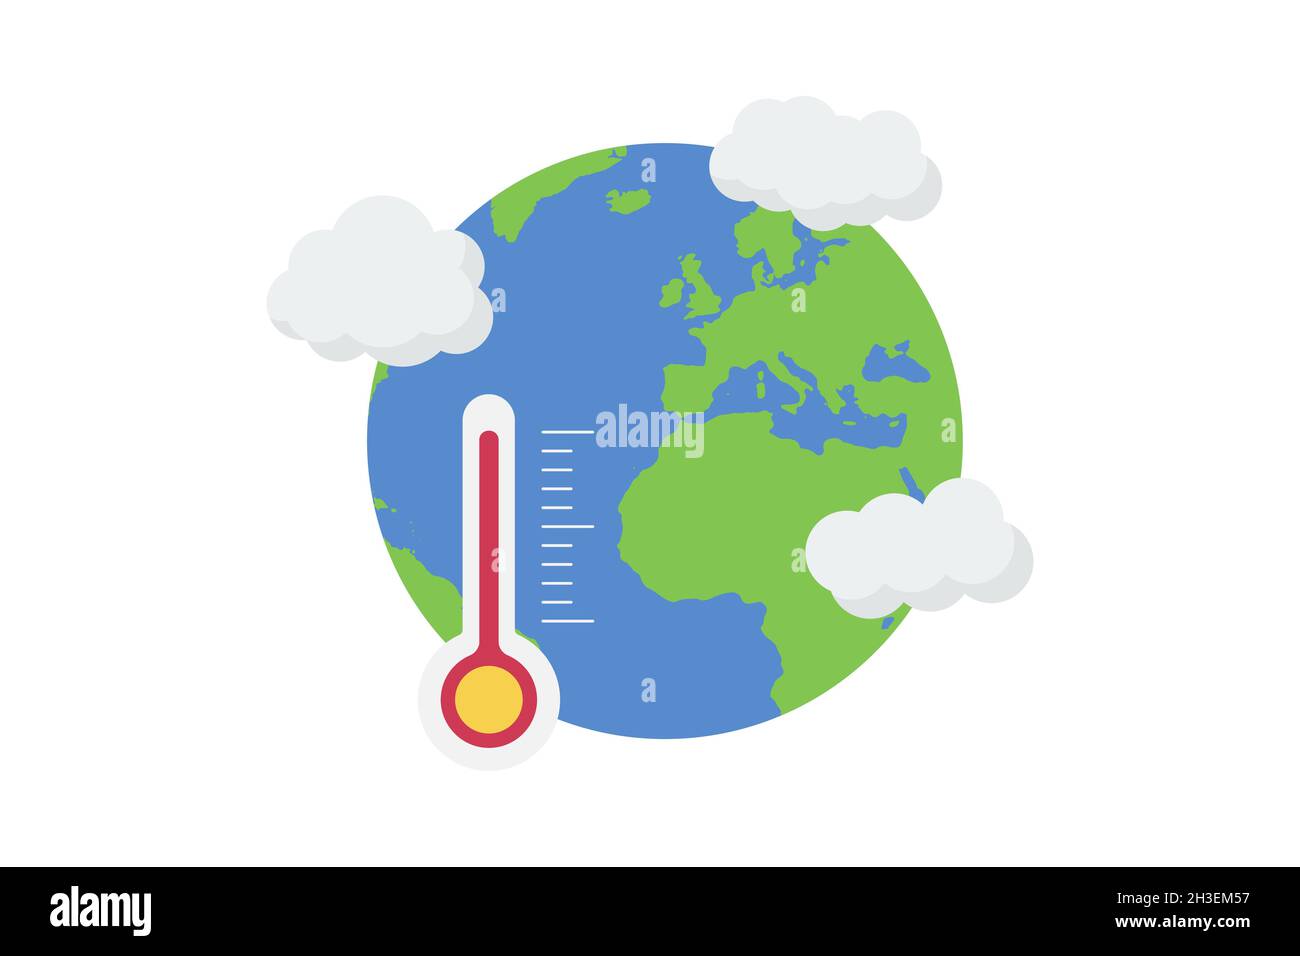 https://c8.alamy.com/comp/2H3EM57/global-warming-icon-earth-with-thermometer-2H3EM57.jpg